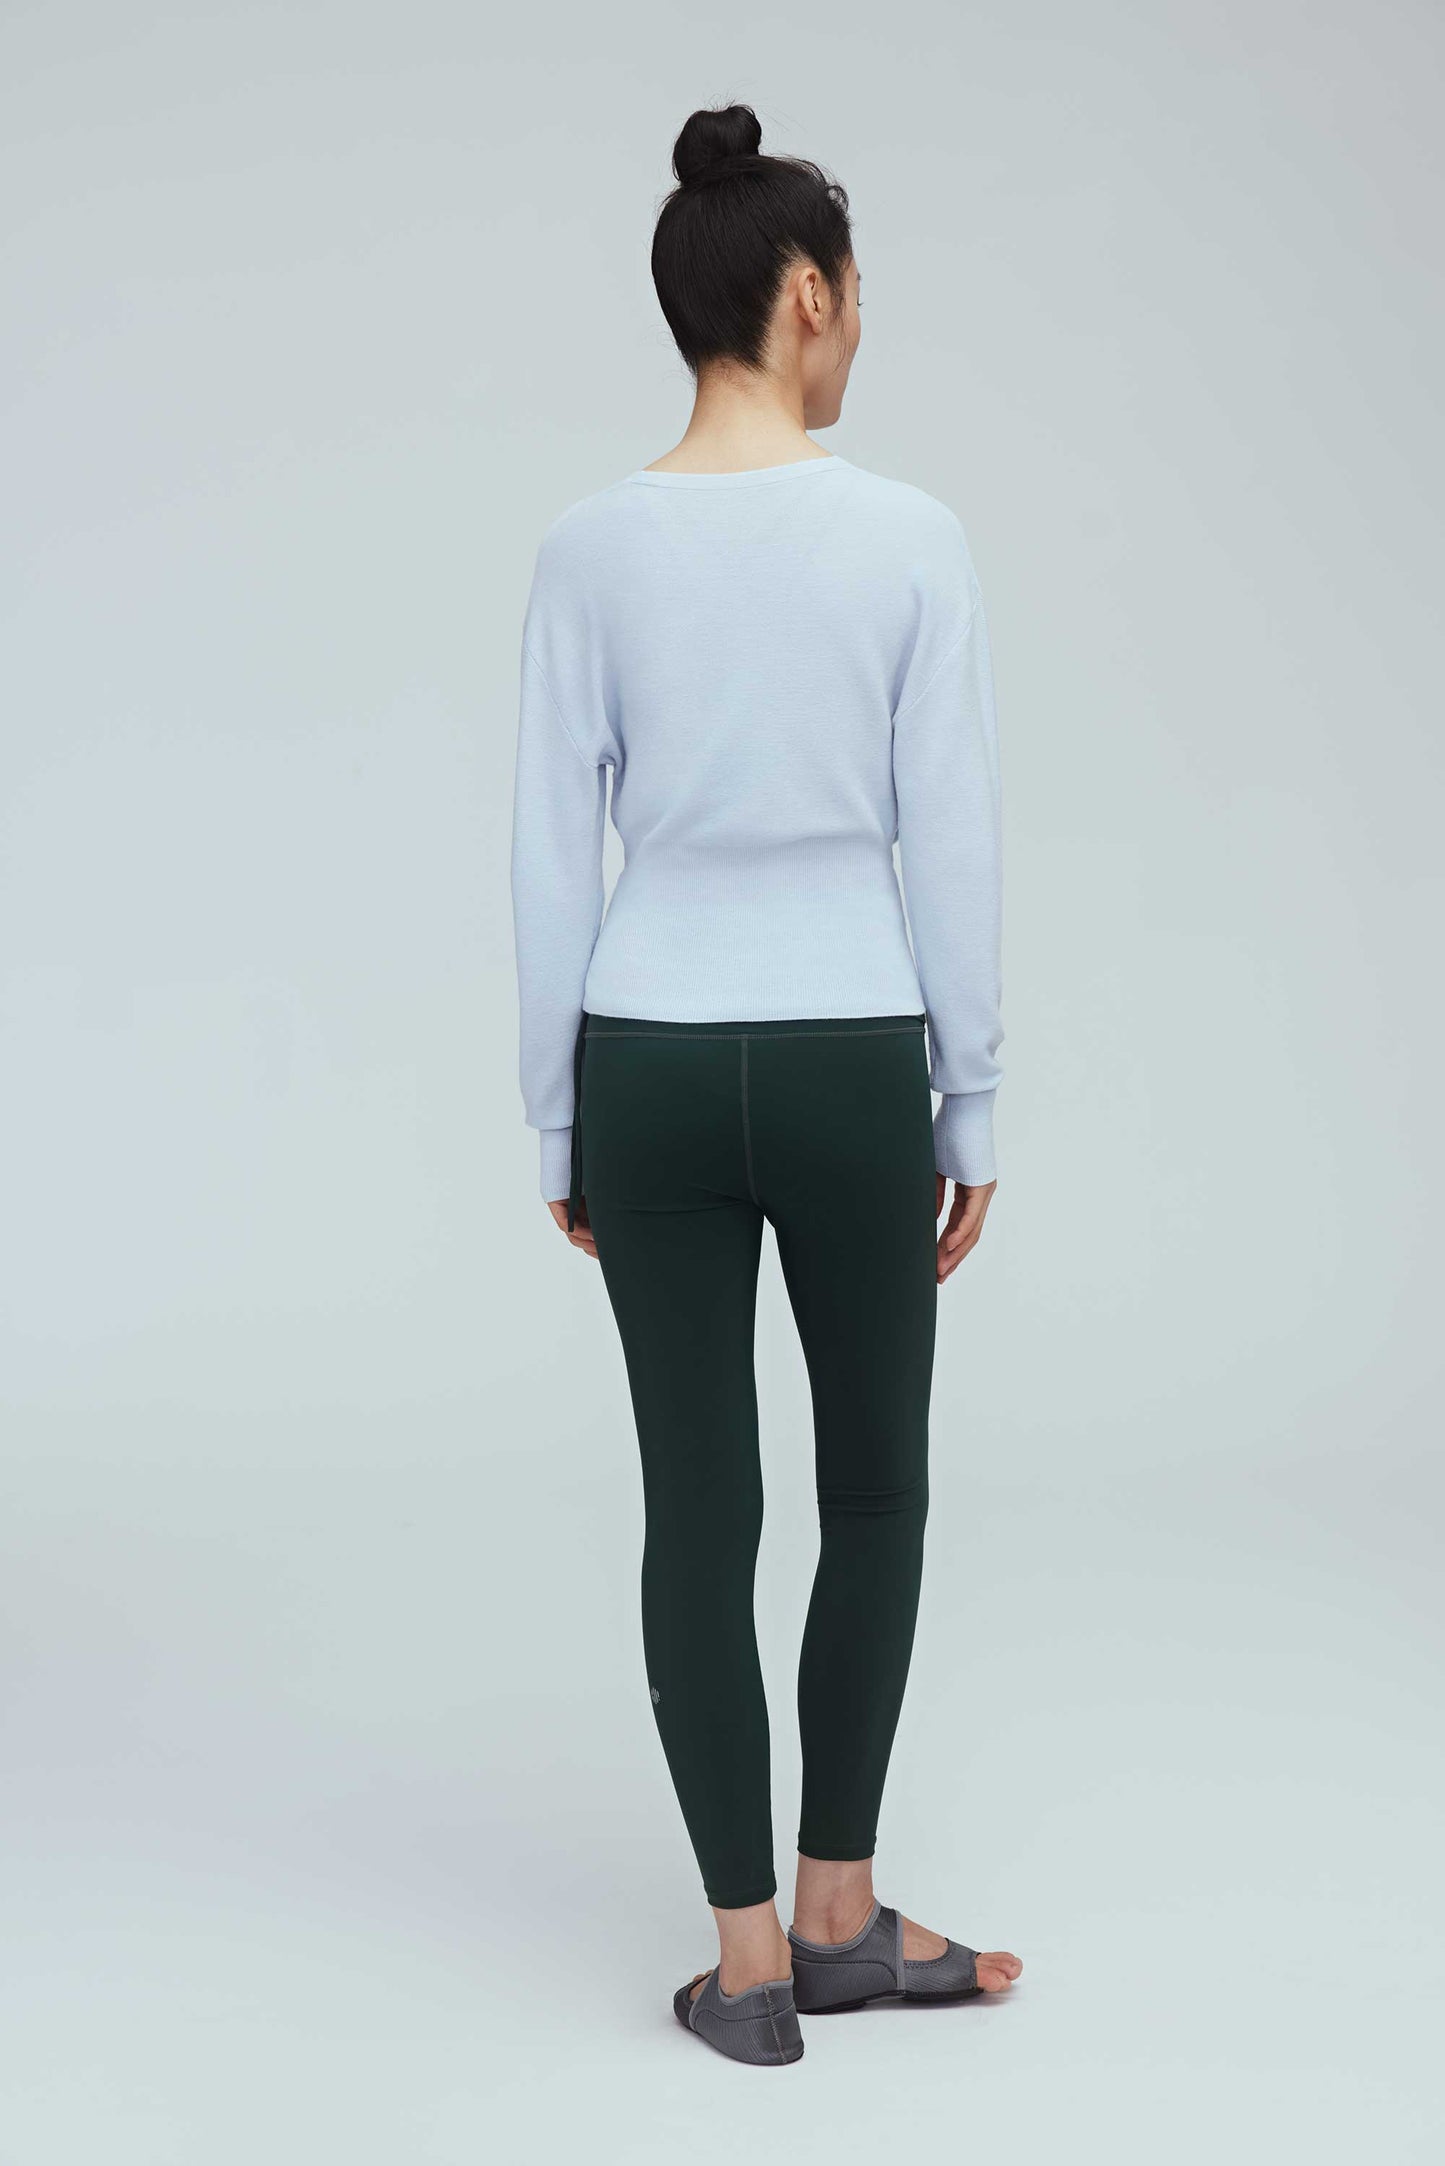 back of a woman wearing a blue wrap sweater and green leggings.